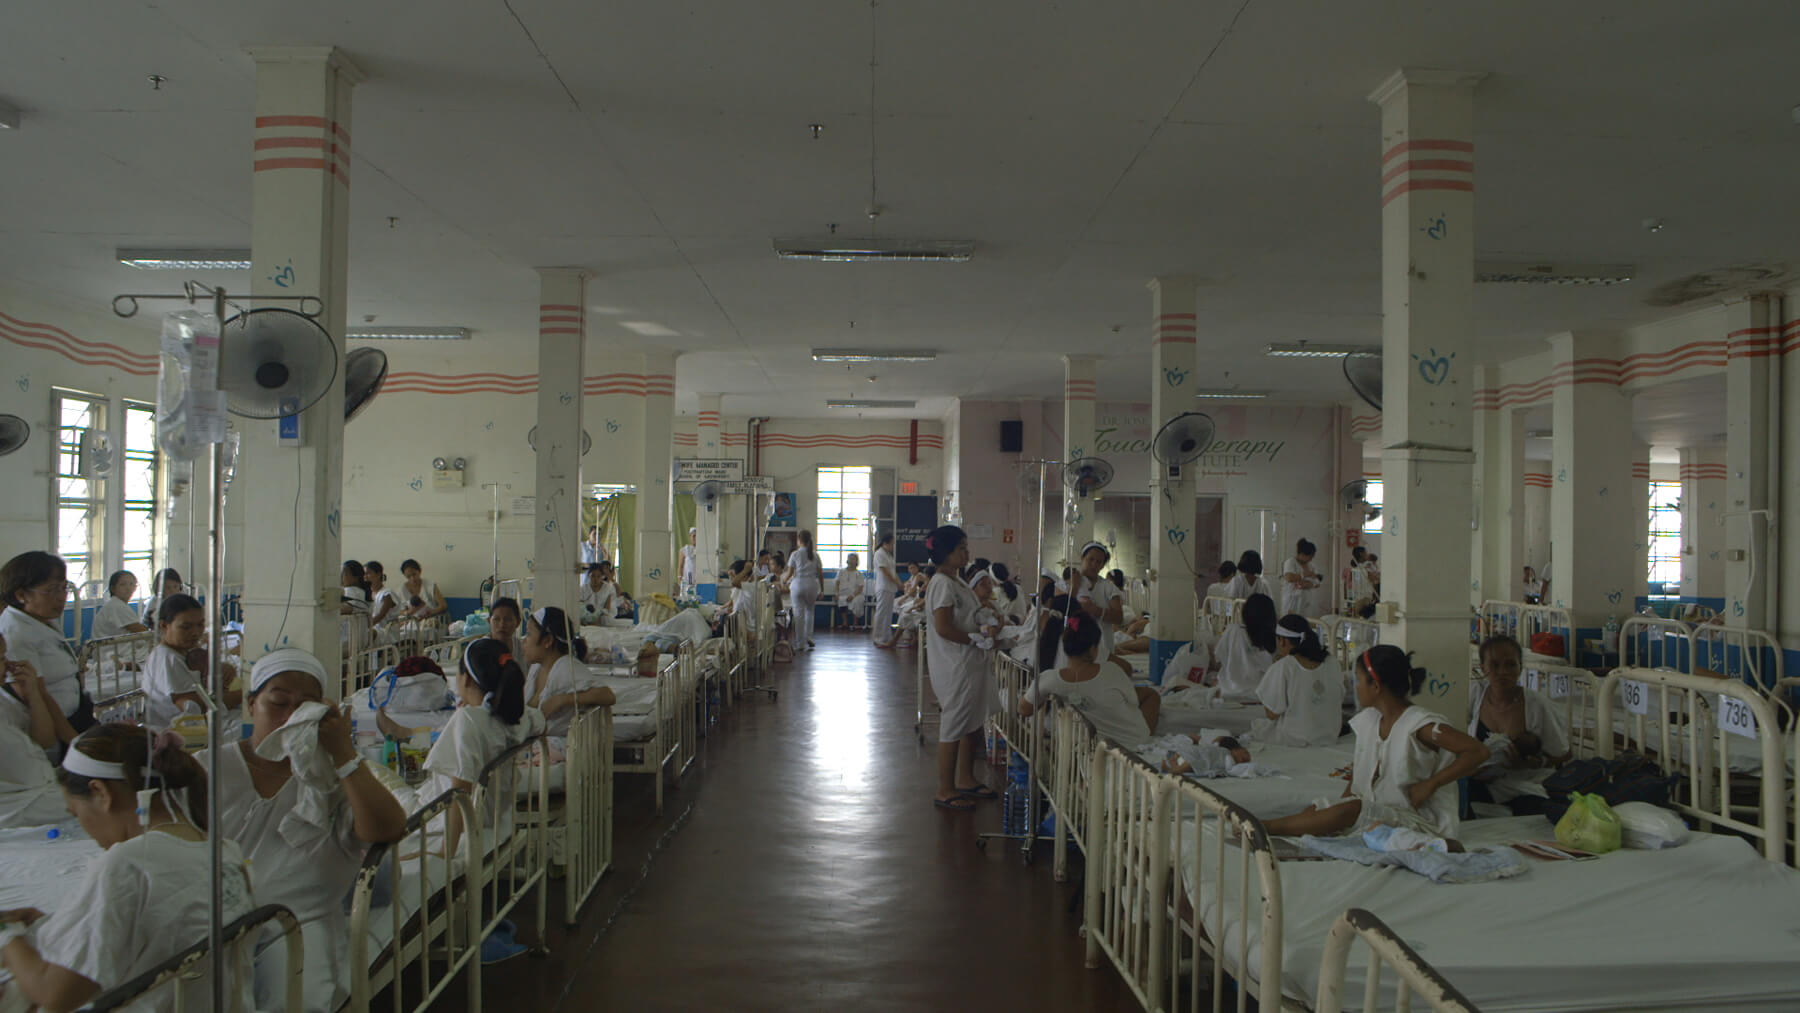 Still from Motherland. A hospital ward with many beds filled with women in various postions - standing, sitting, and talking with one another.